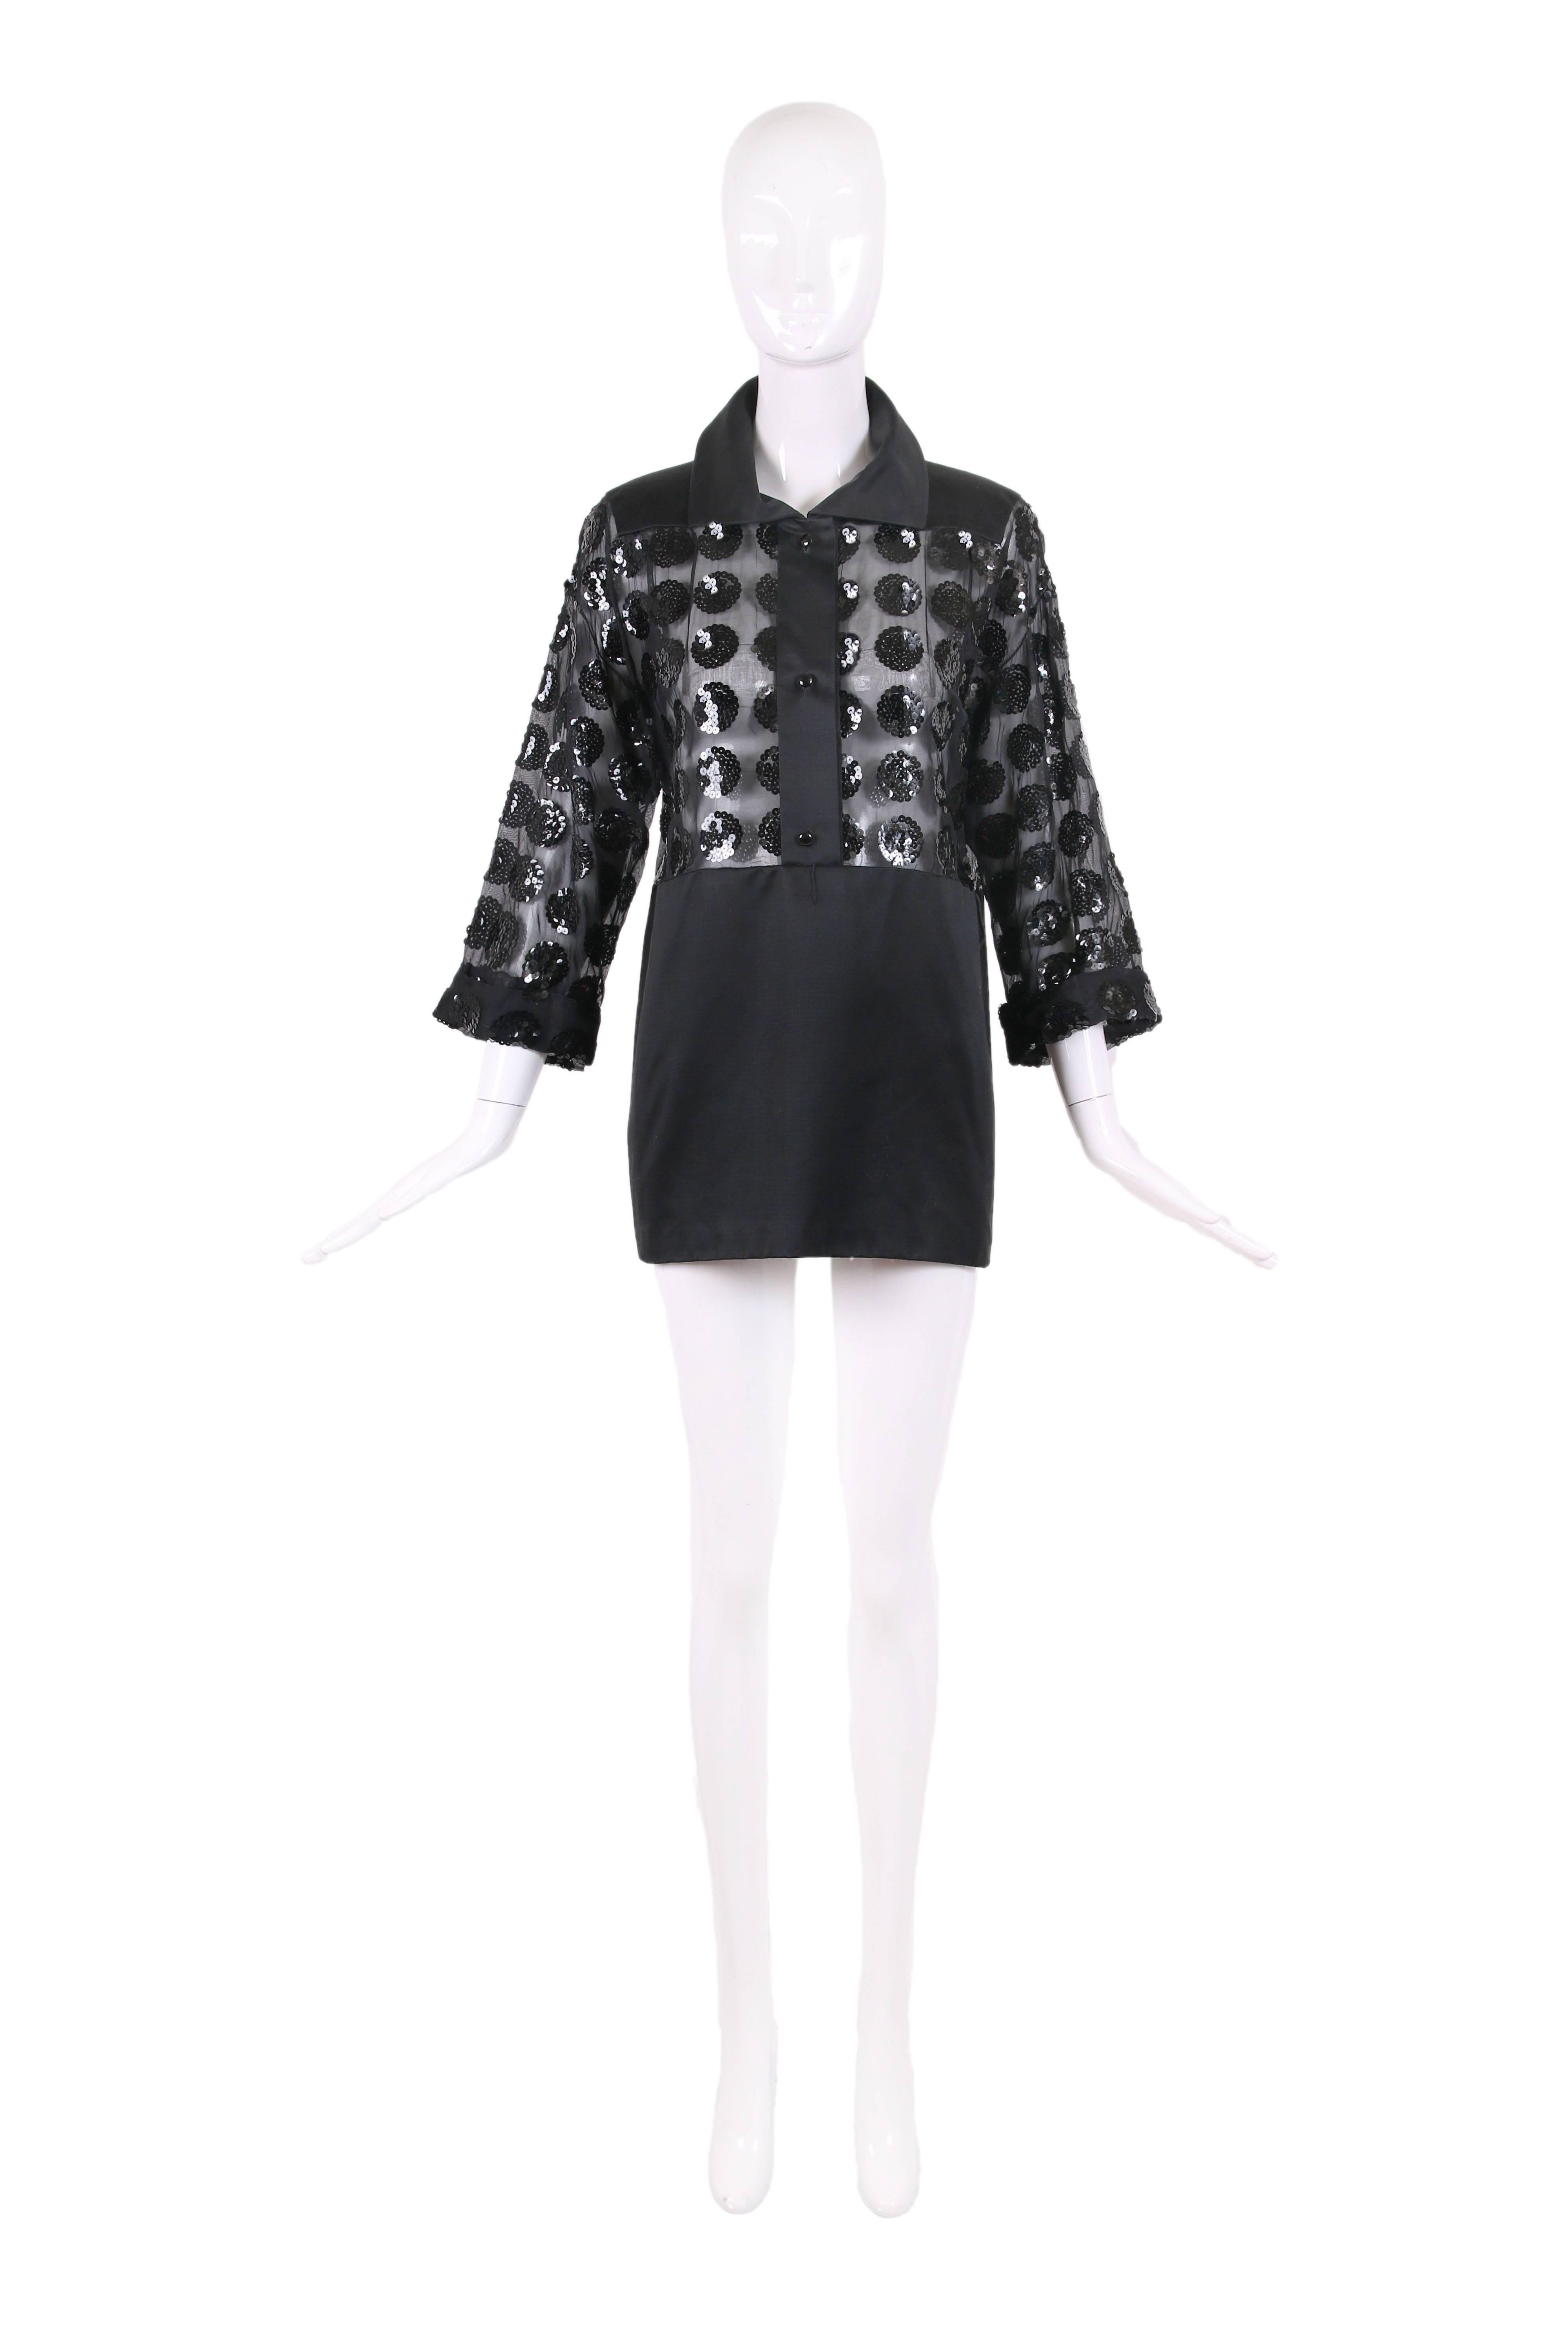 Vintage Courreges black mini dress with sheer bodice covered with a pattern of circular sequins and a mini skirt made from either black satin or black polished cotton - there is no fabric tag. No size tag. In excellent condition - missing waist belt.